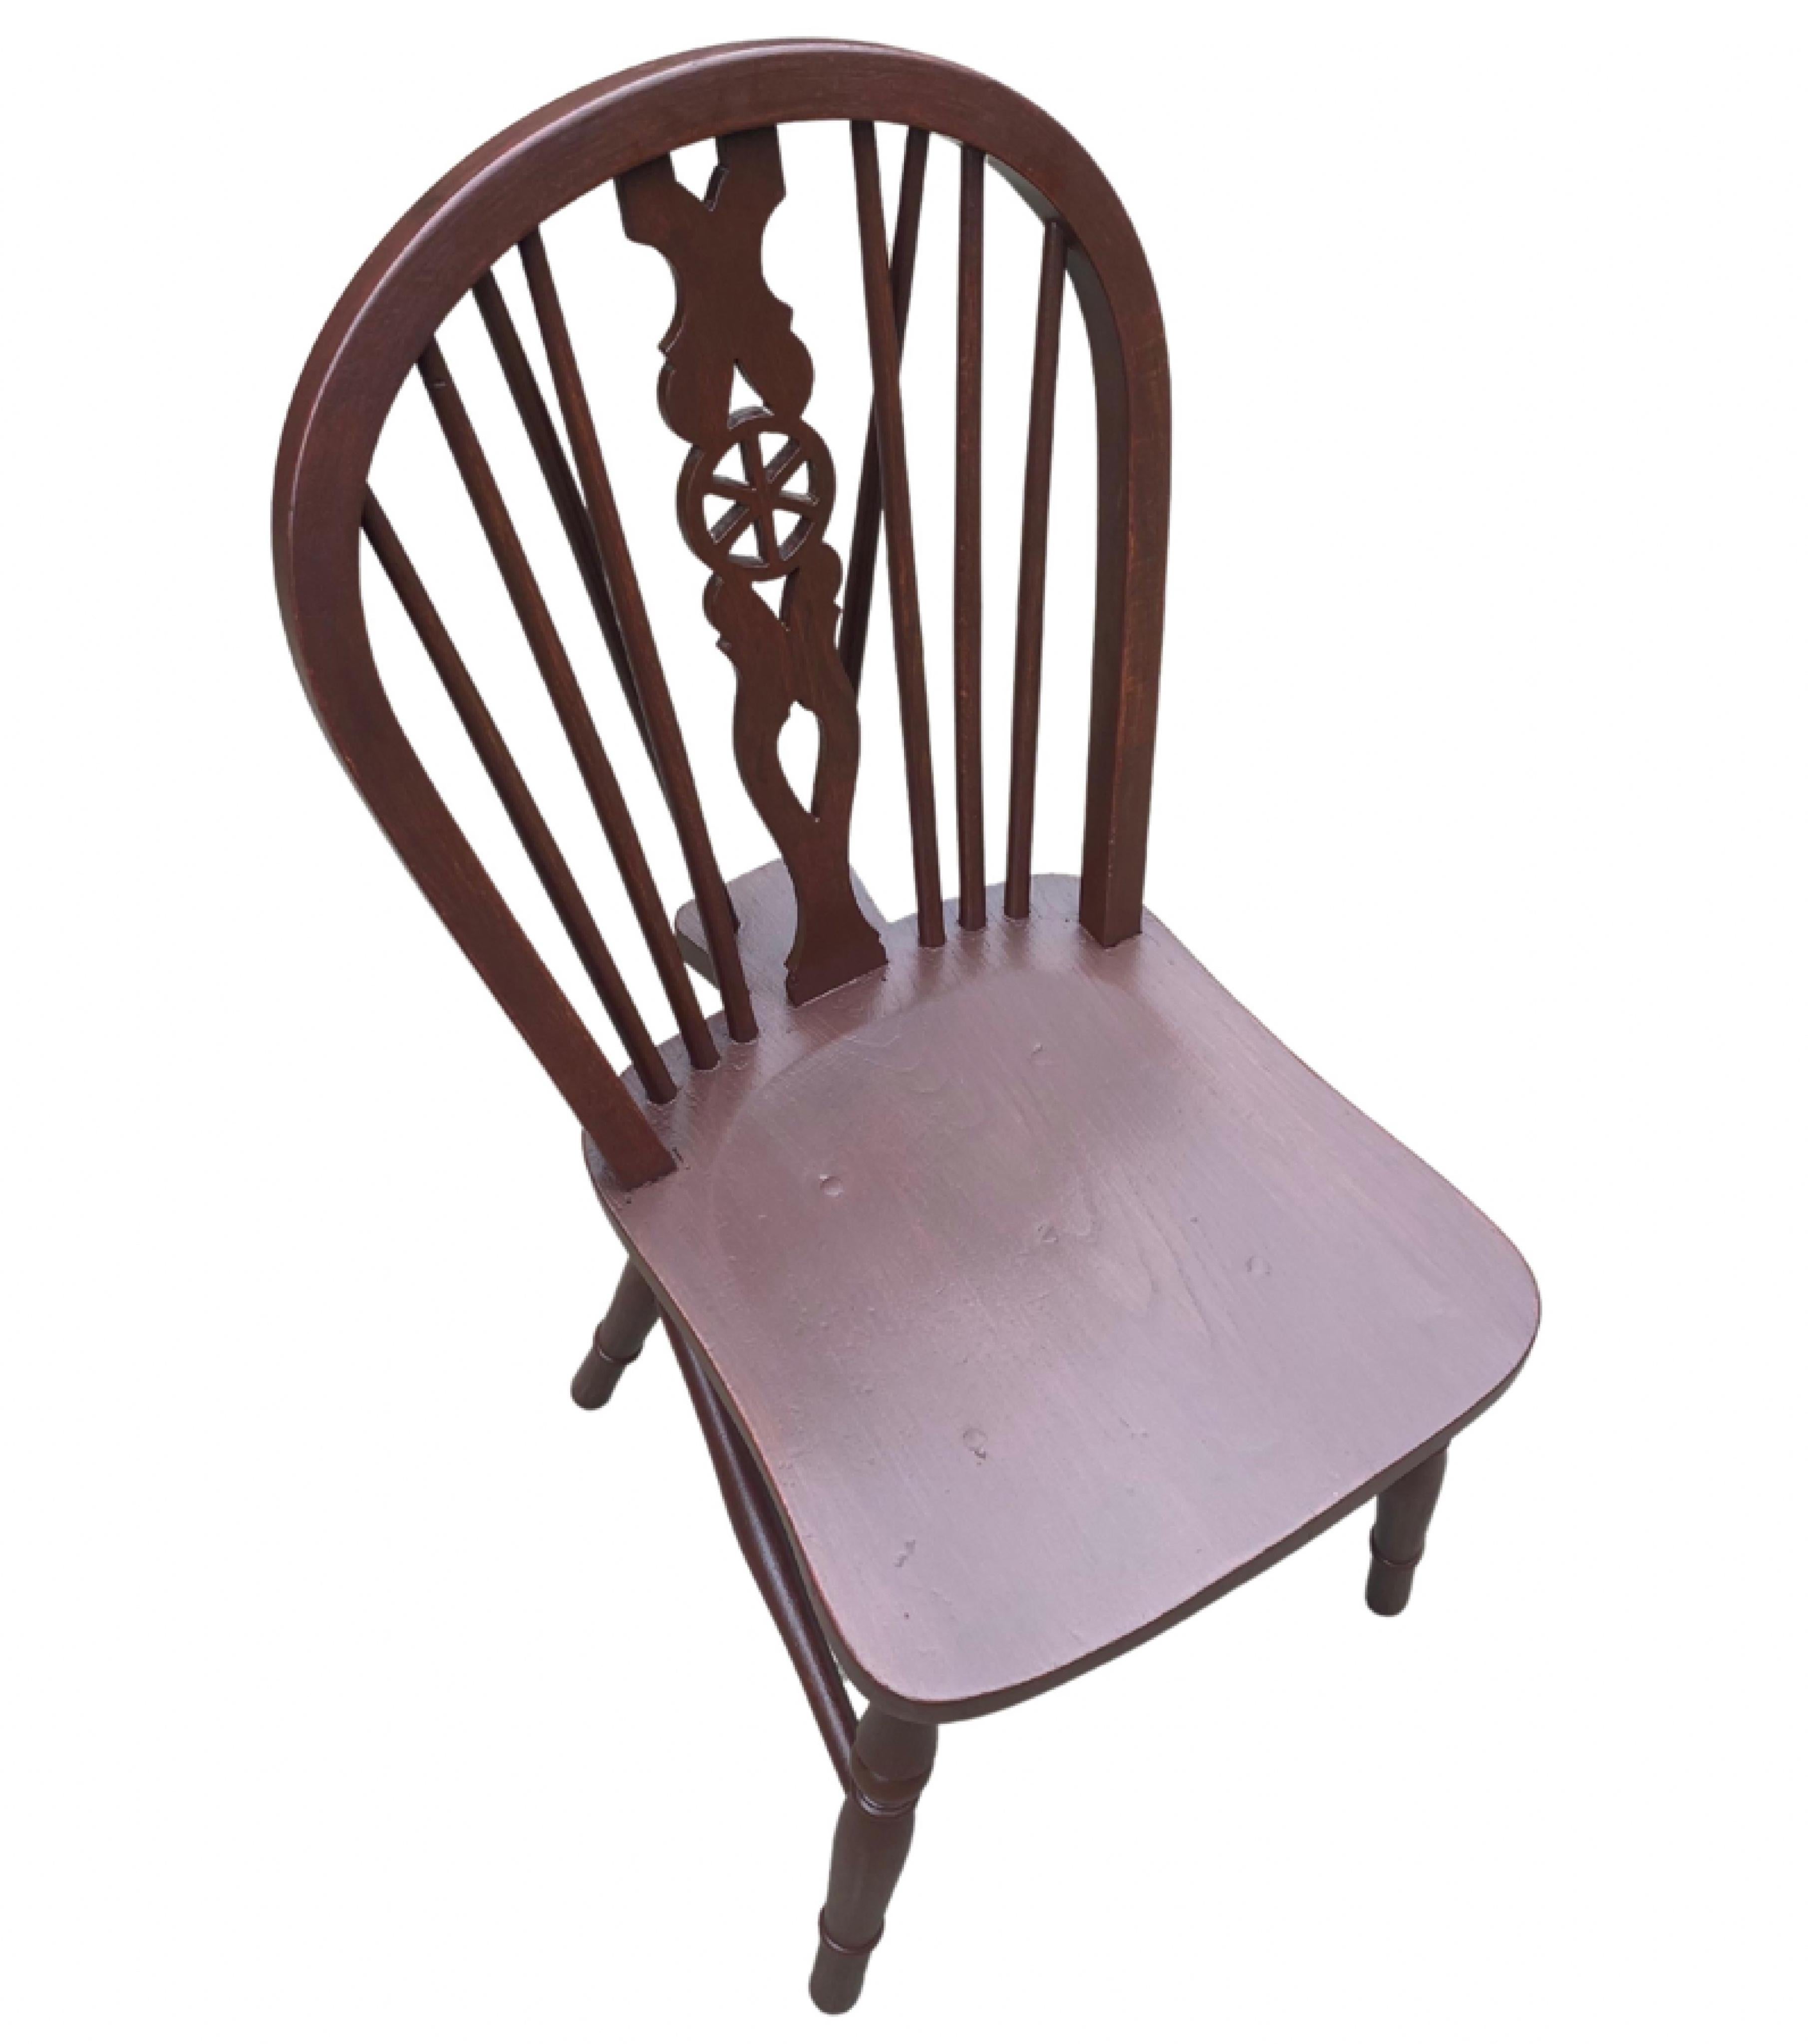 Set of four Windsor chairs. The 